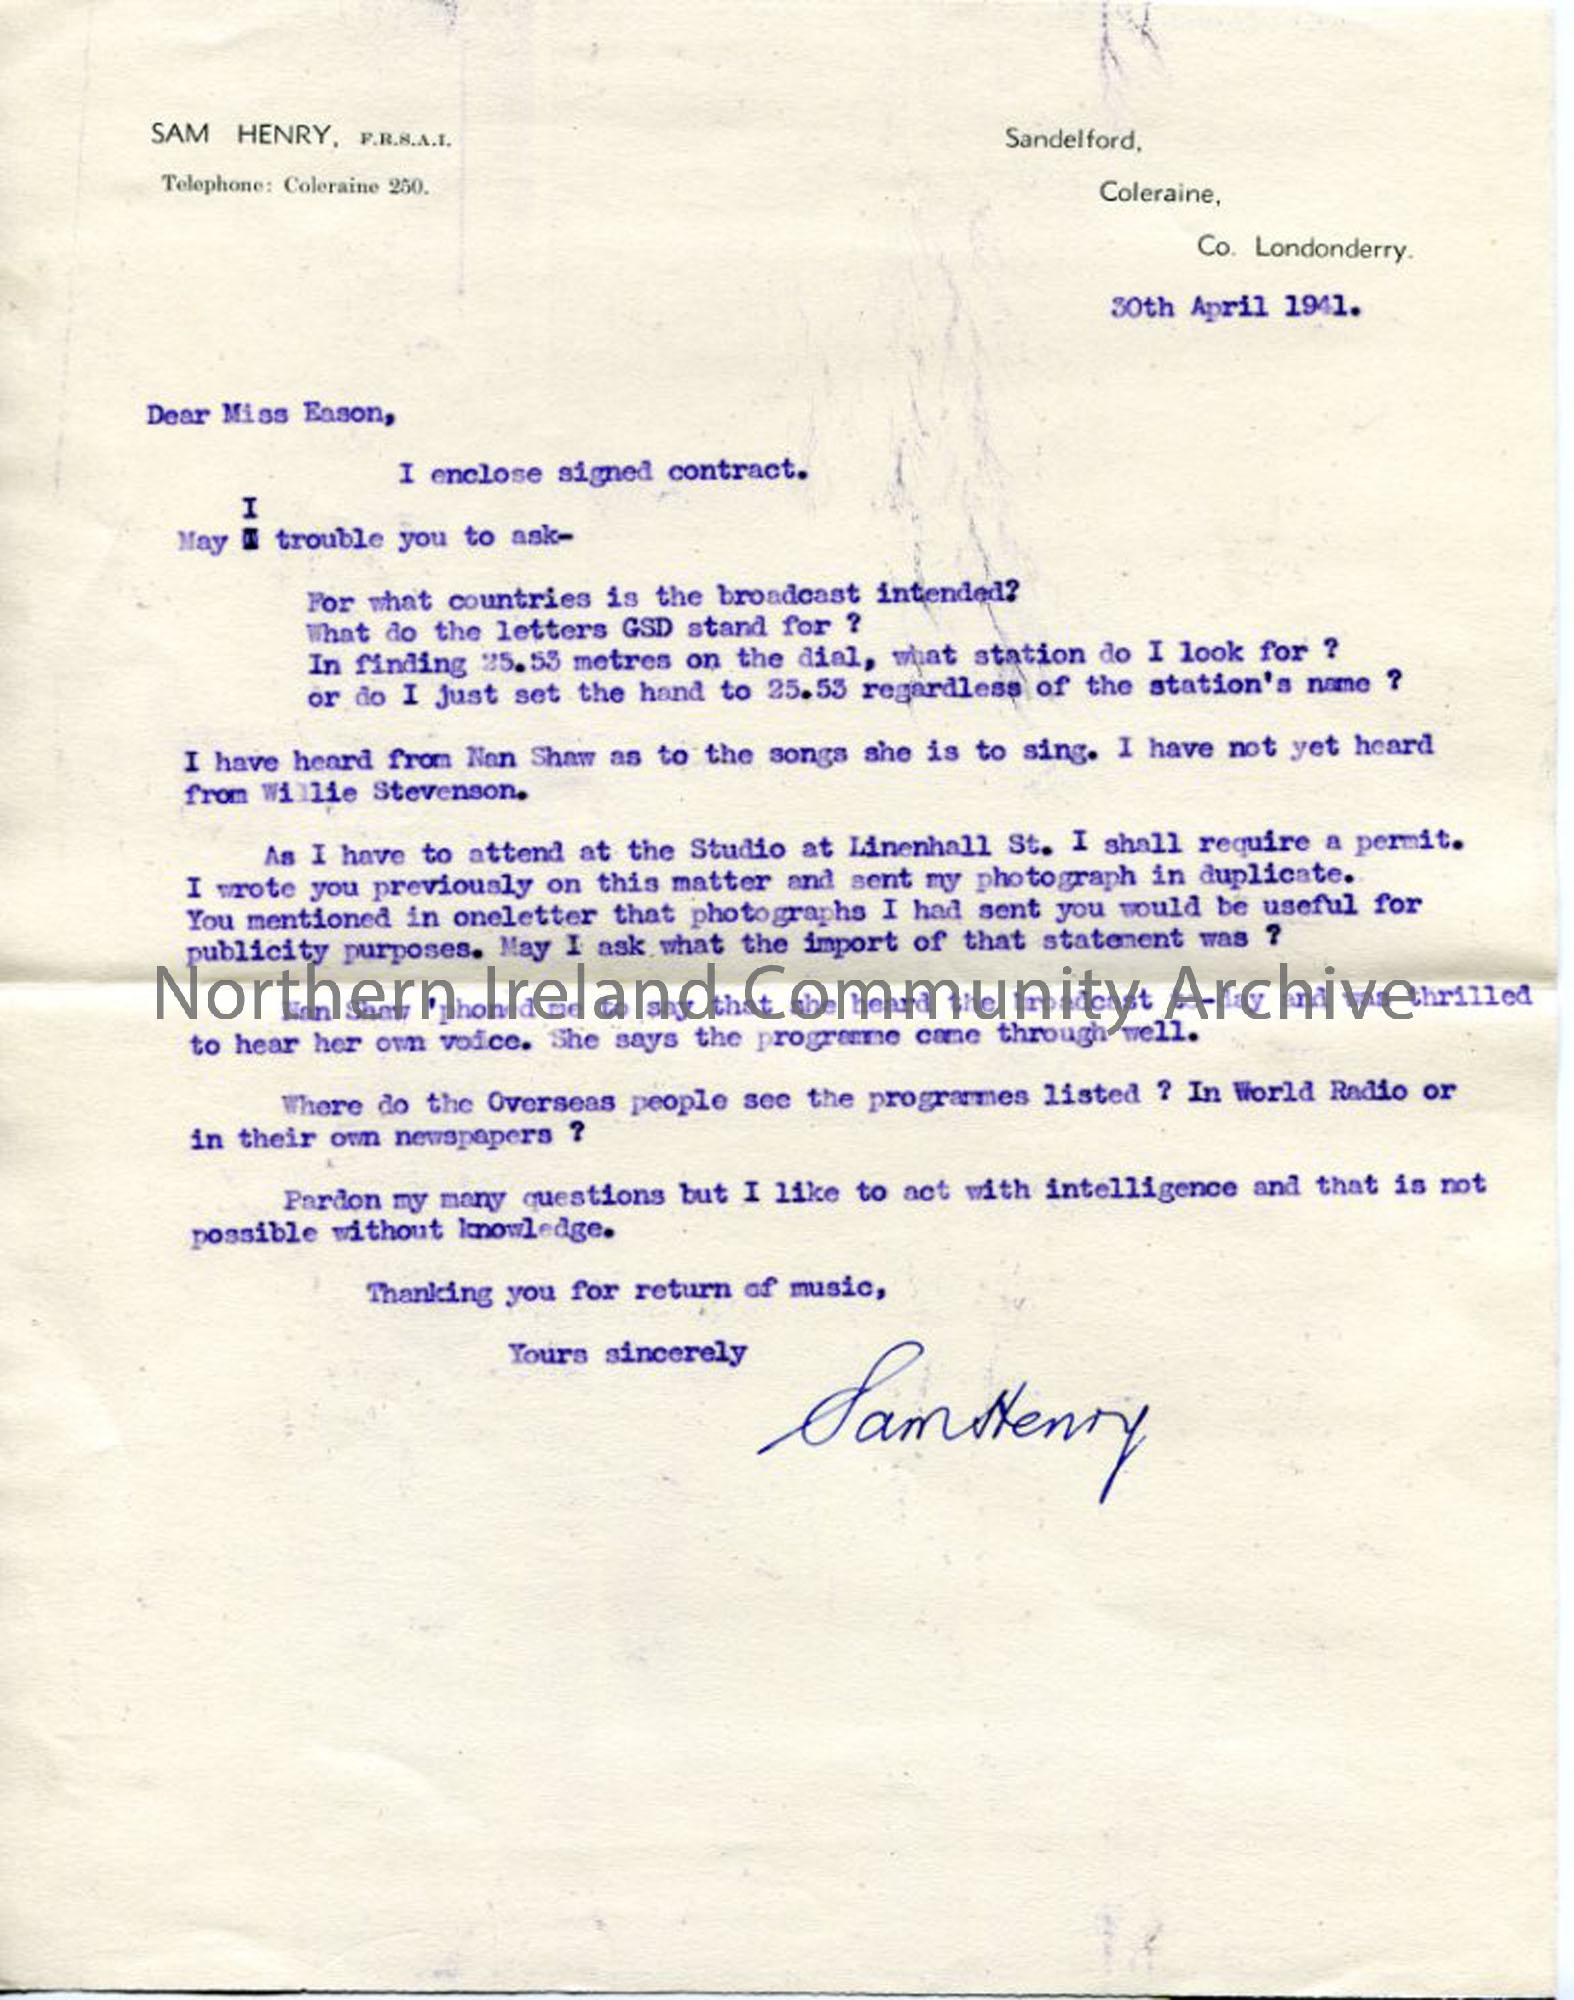 Letter to Miss Eason of the BBC from Sam Henry, dated 30.4.1941